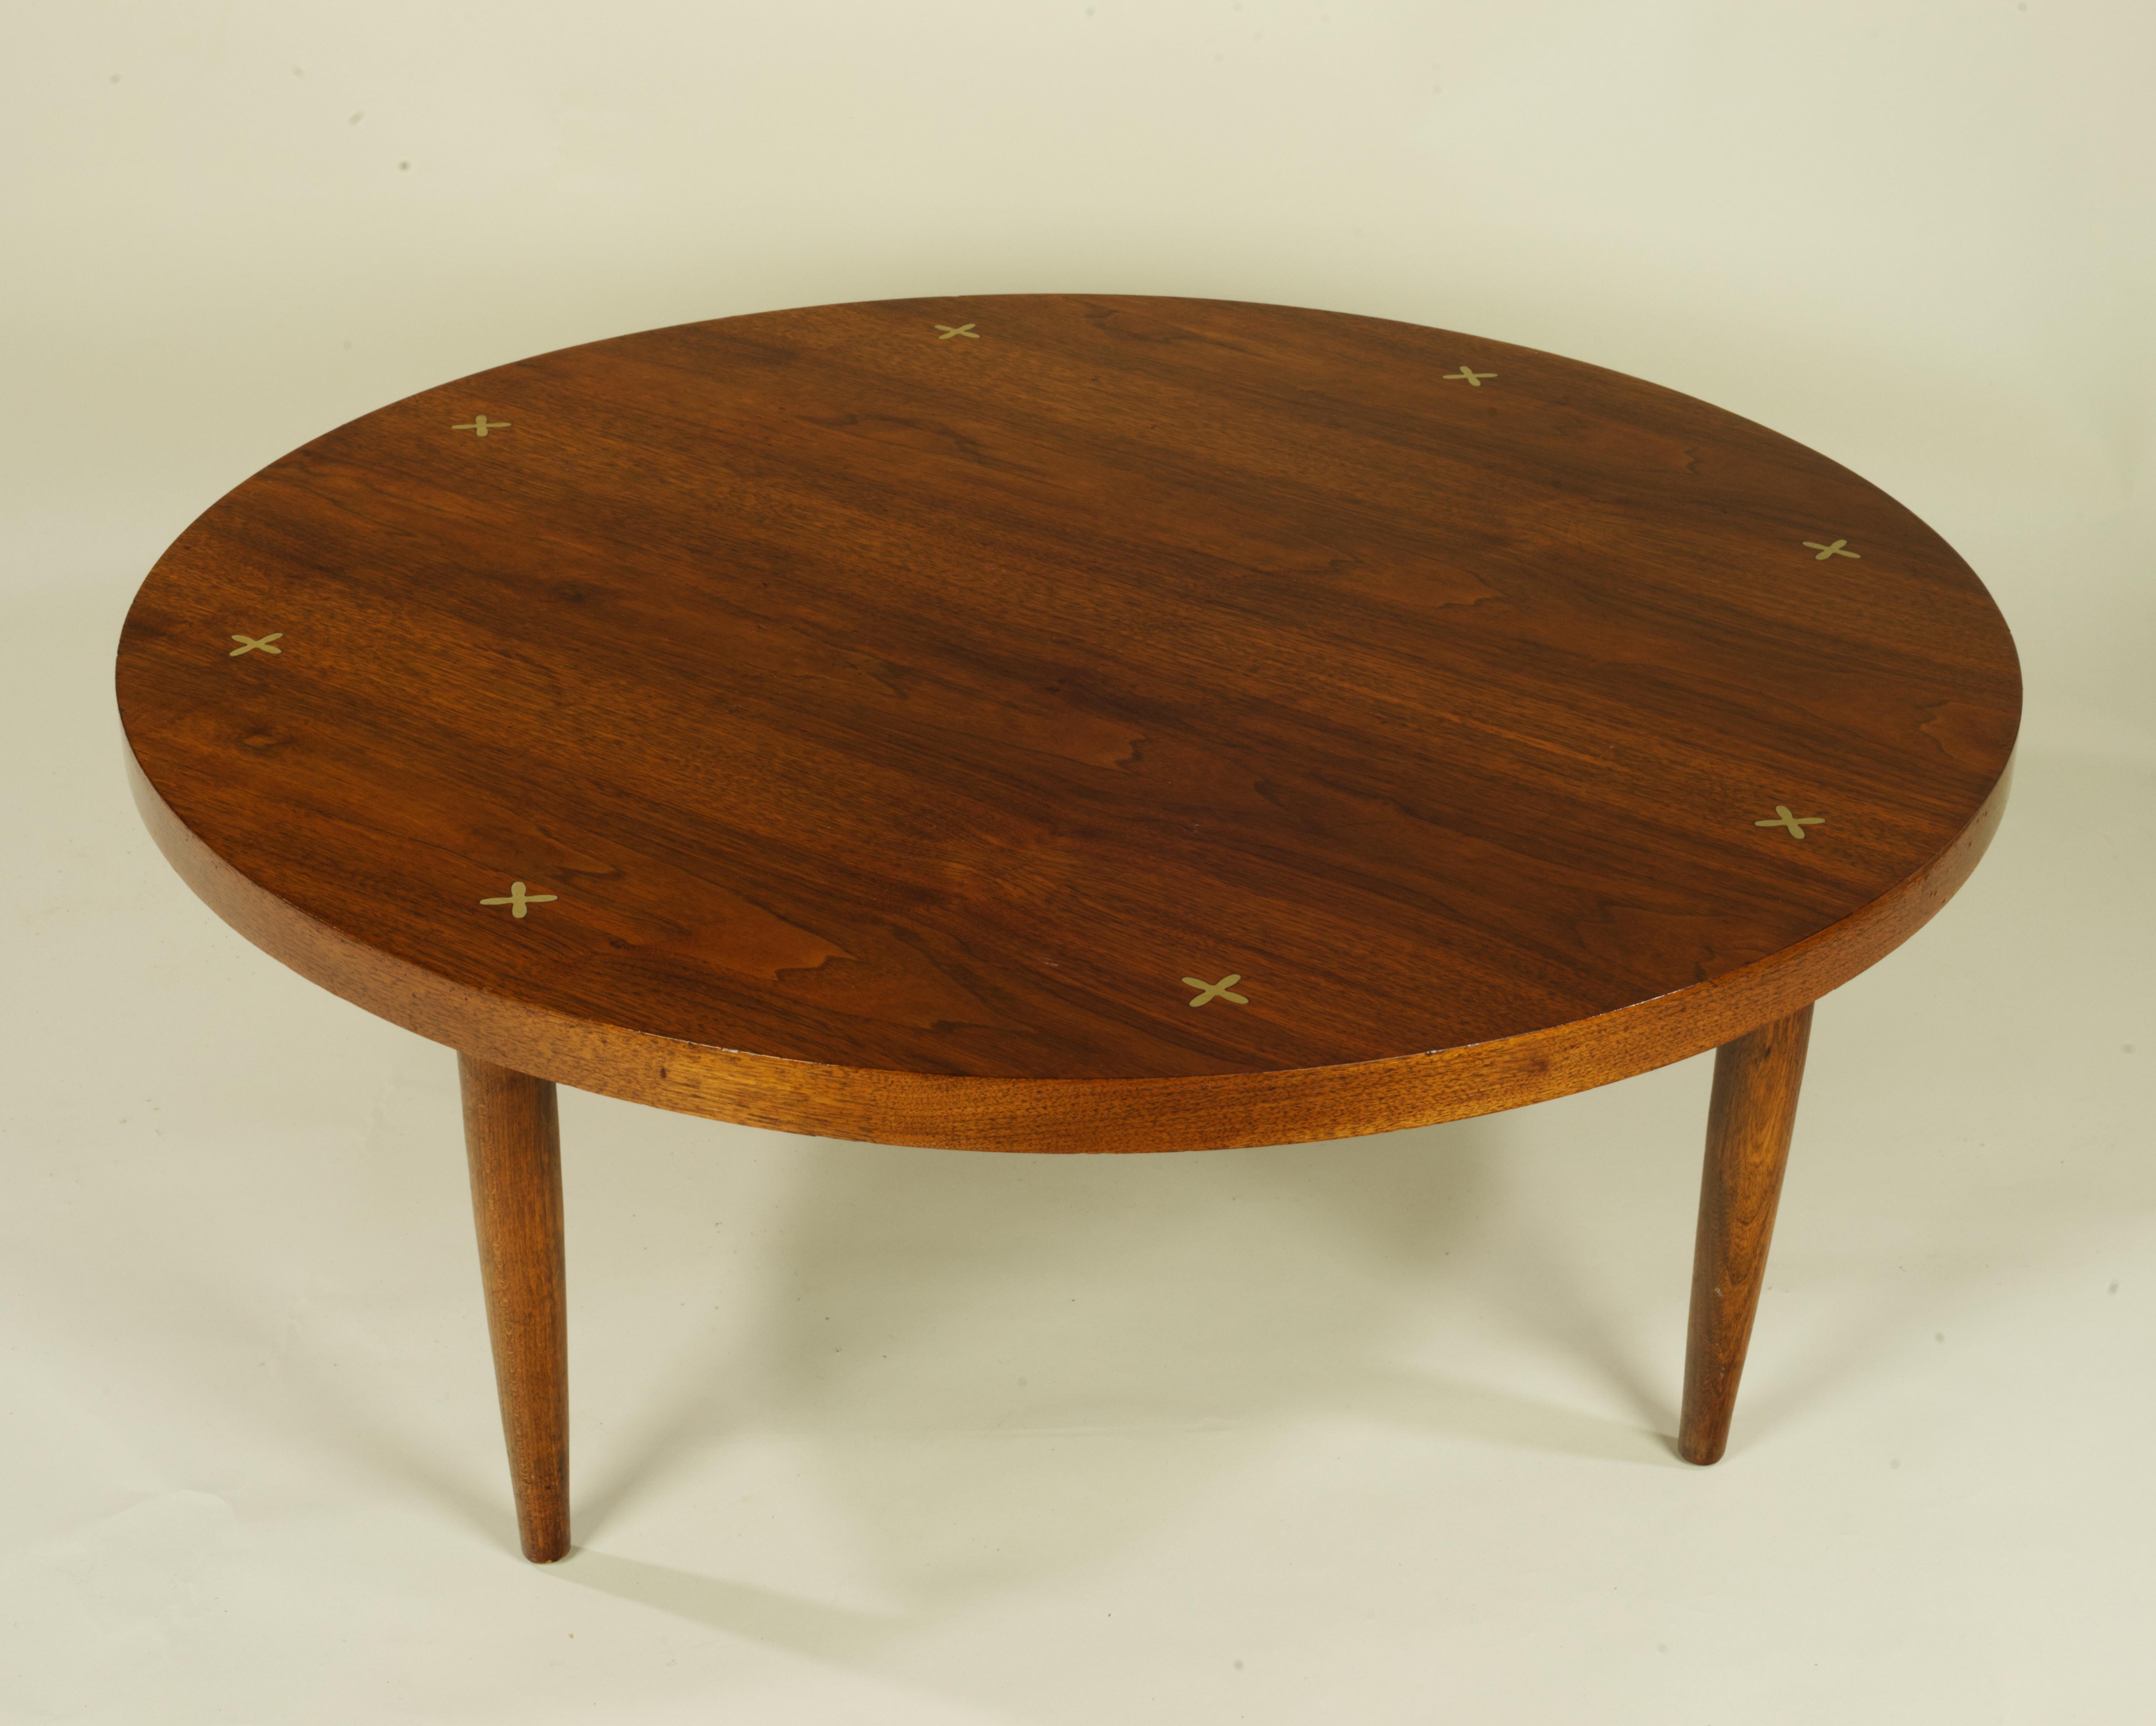 Lovely Walnut veneered coffee table, designed by Merton Gershun and manufactured by American of Martinsville. Selection of the Walnut veneer and book matching are superb. 
There are no structural issues with he table. Over all condition is